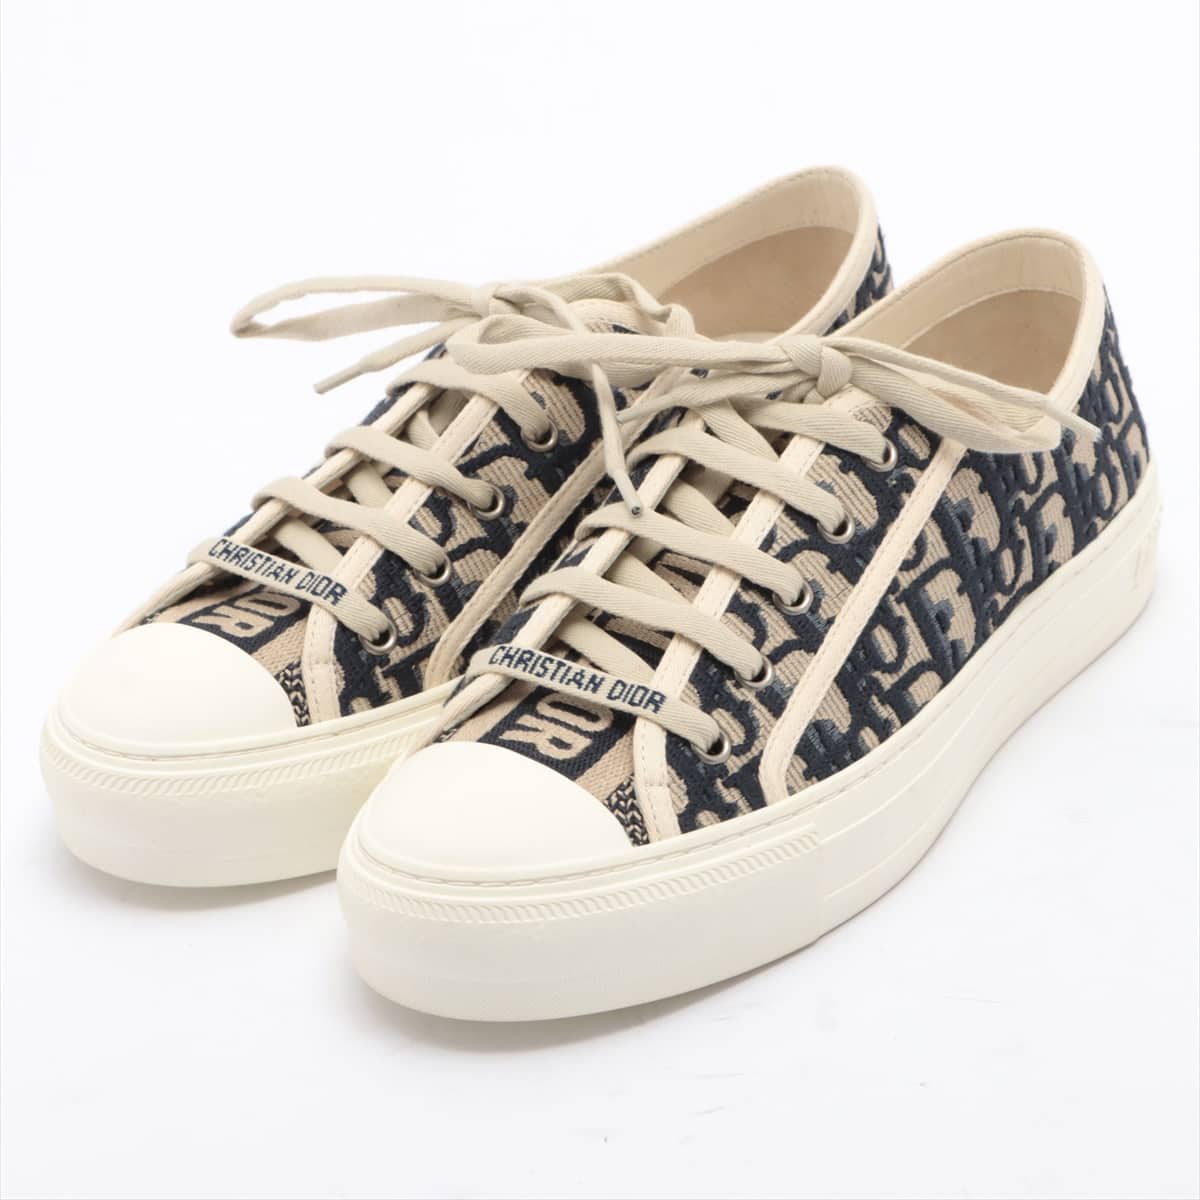 Christian Dior canvas Sneakers 38 Unisex Blue x white Trotter